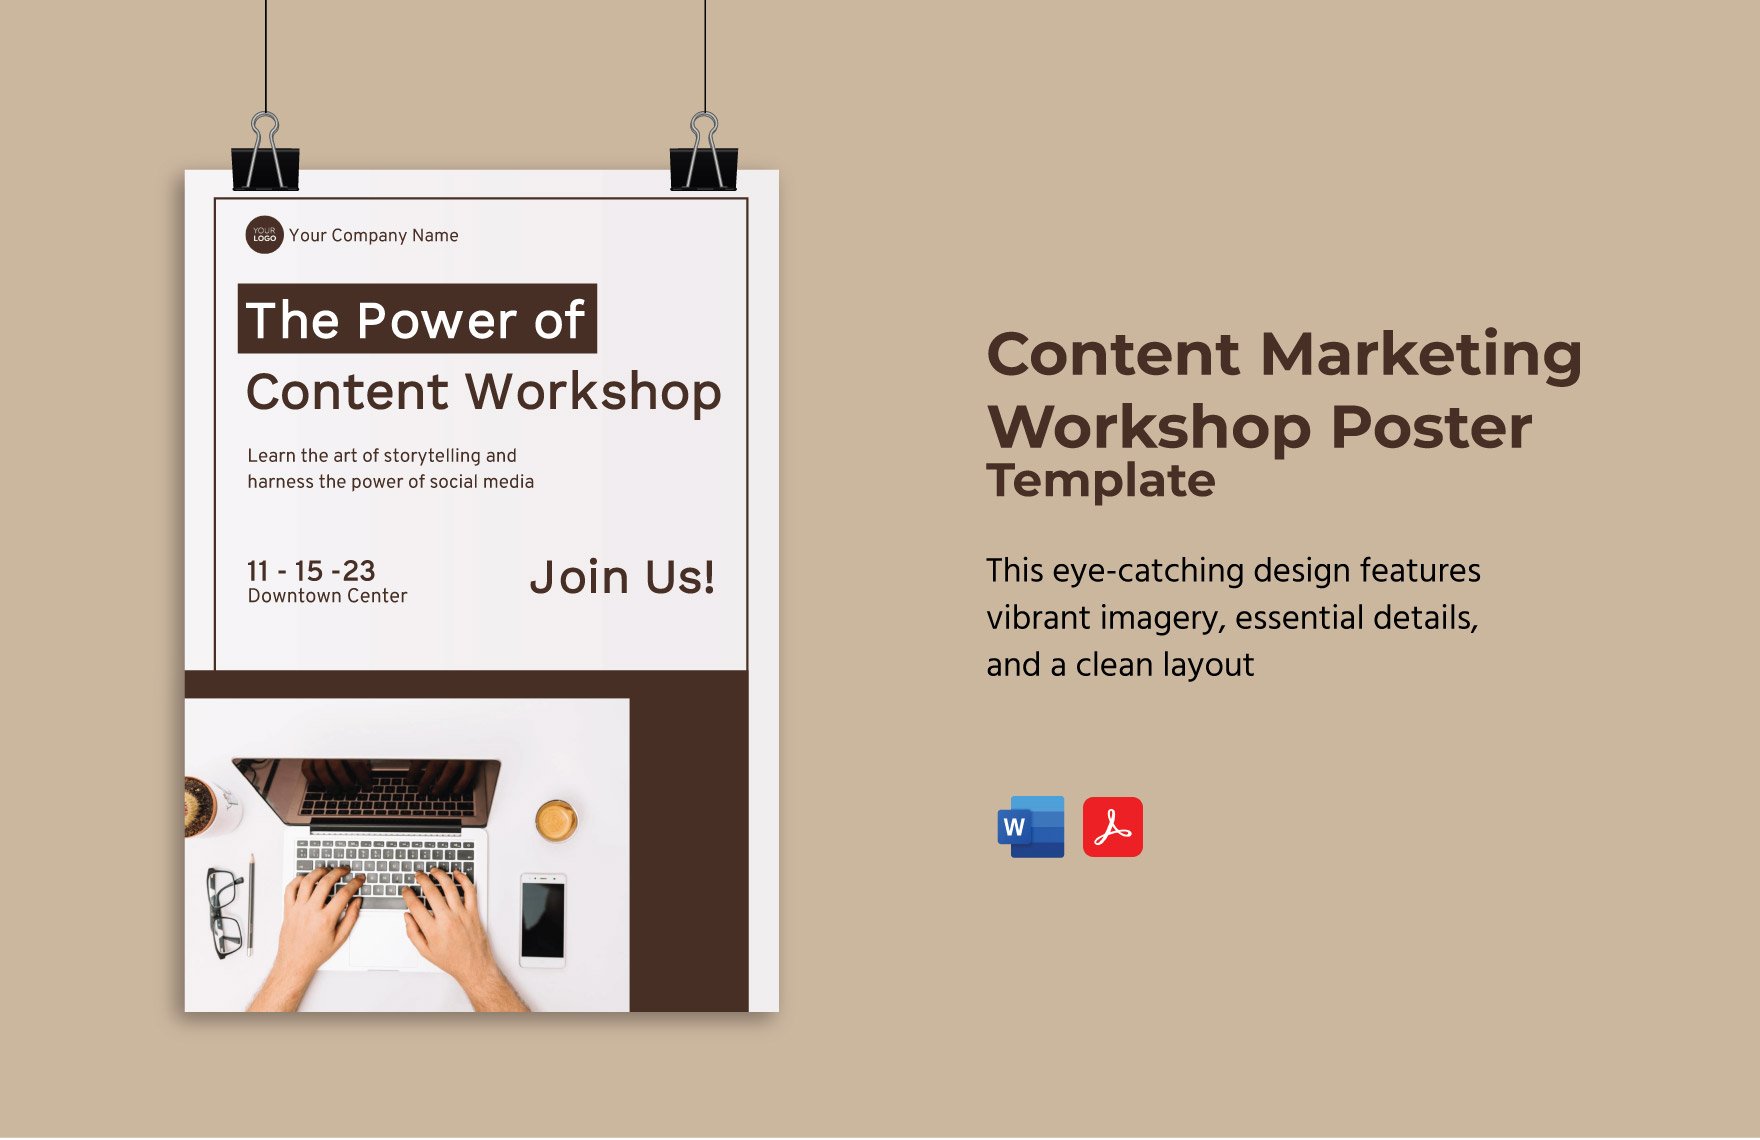 Content Marketing Workshop Poster Template